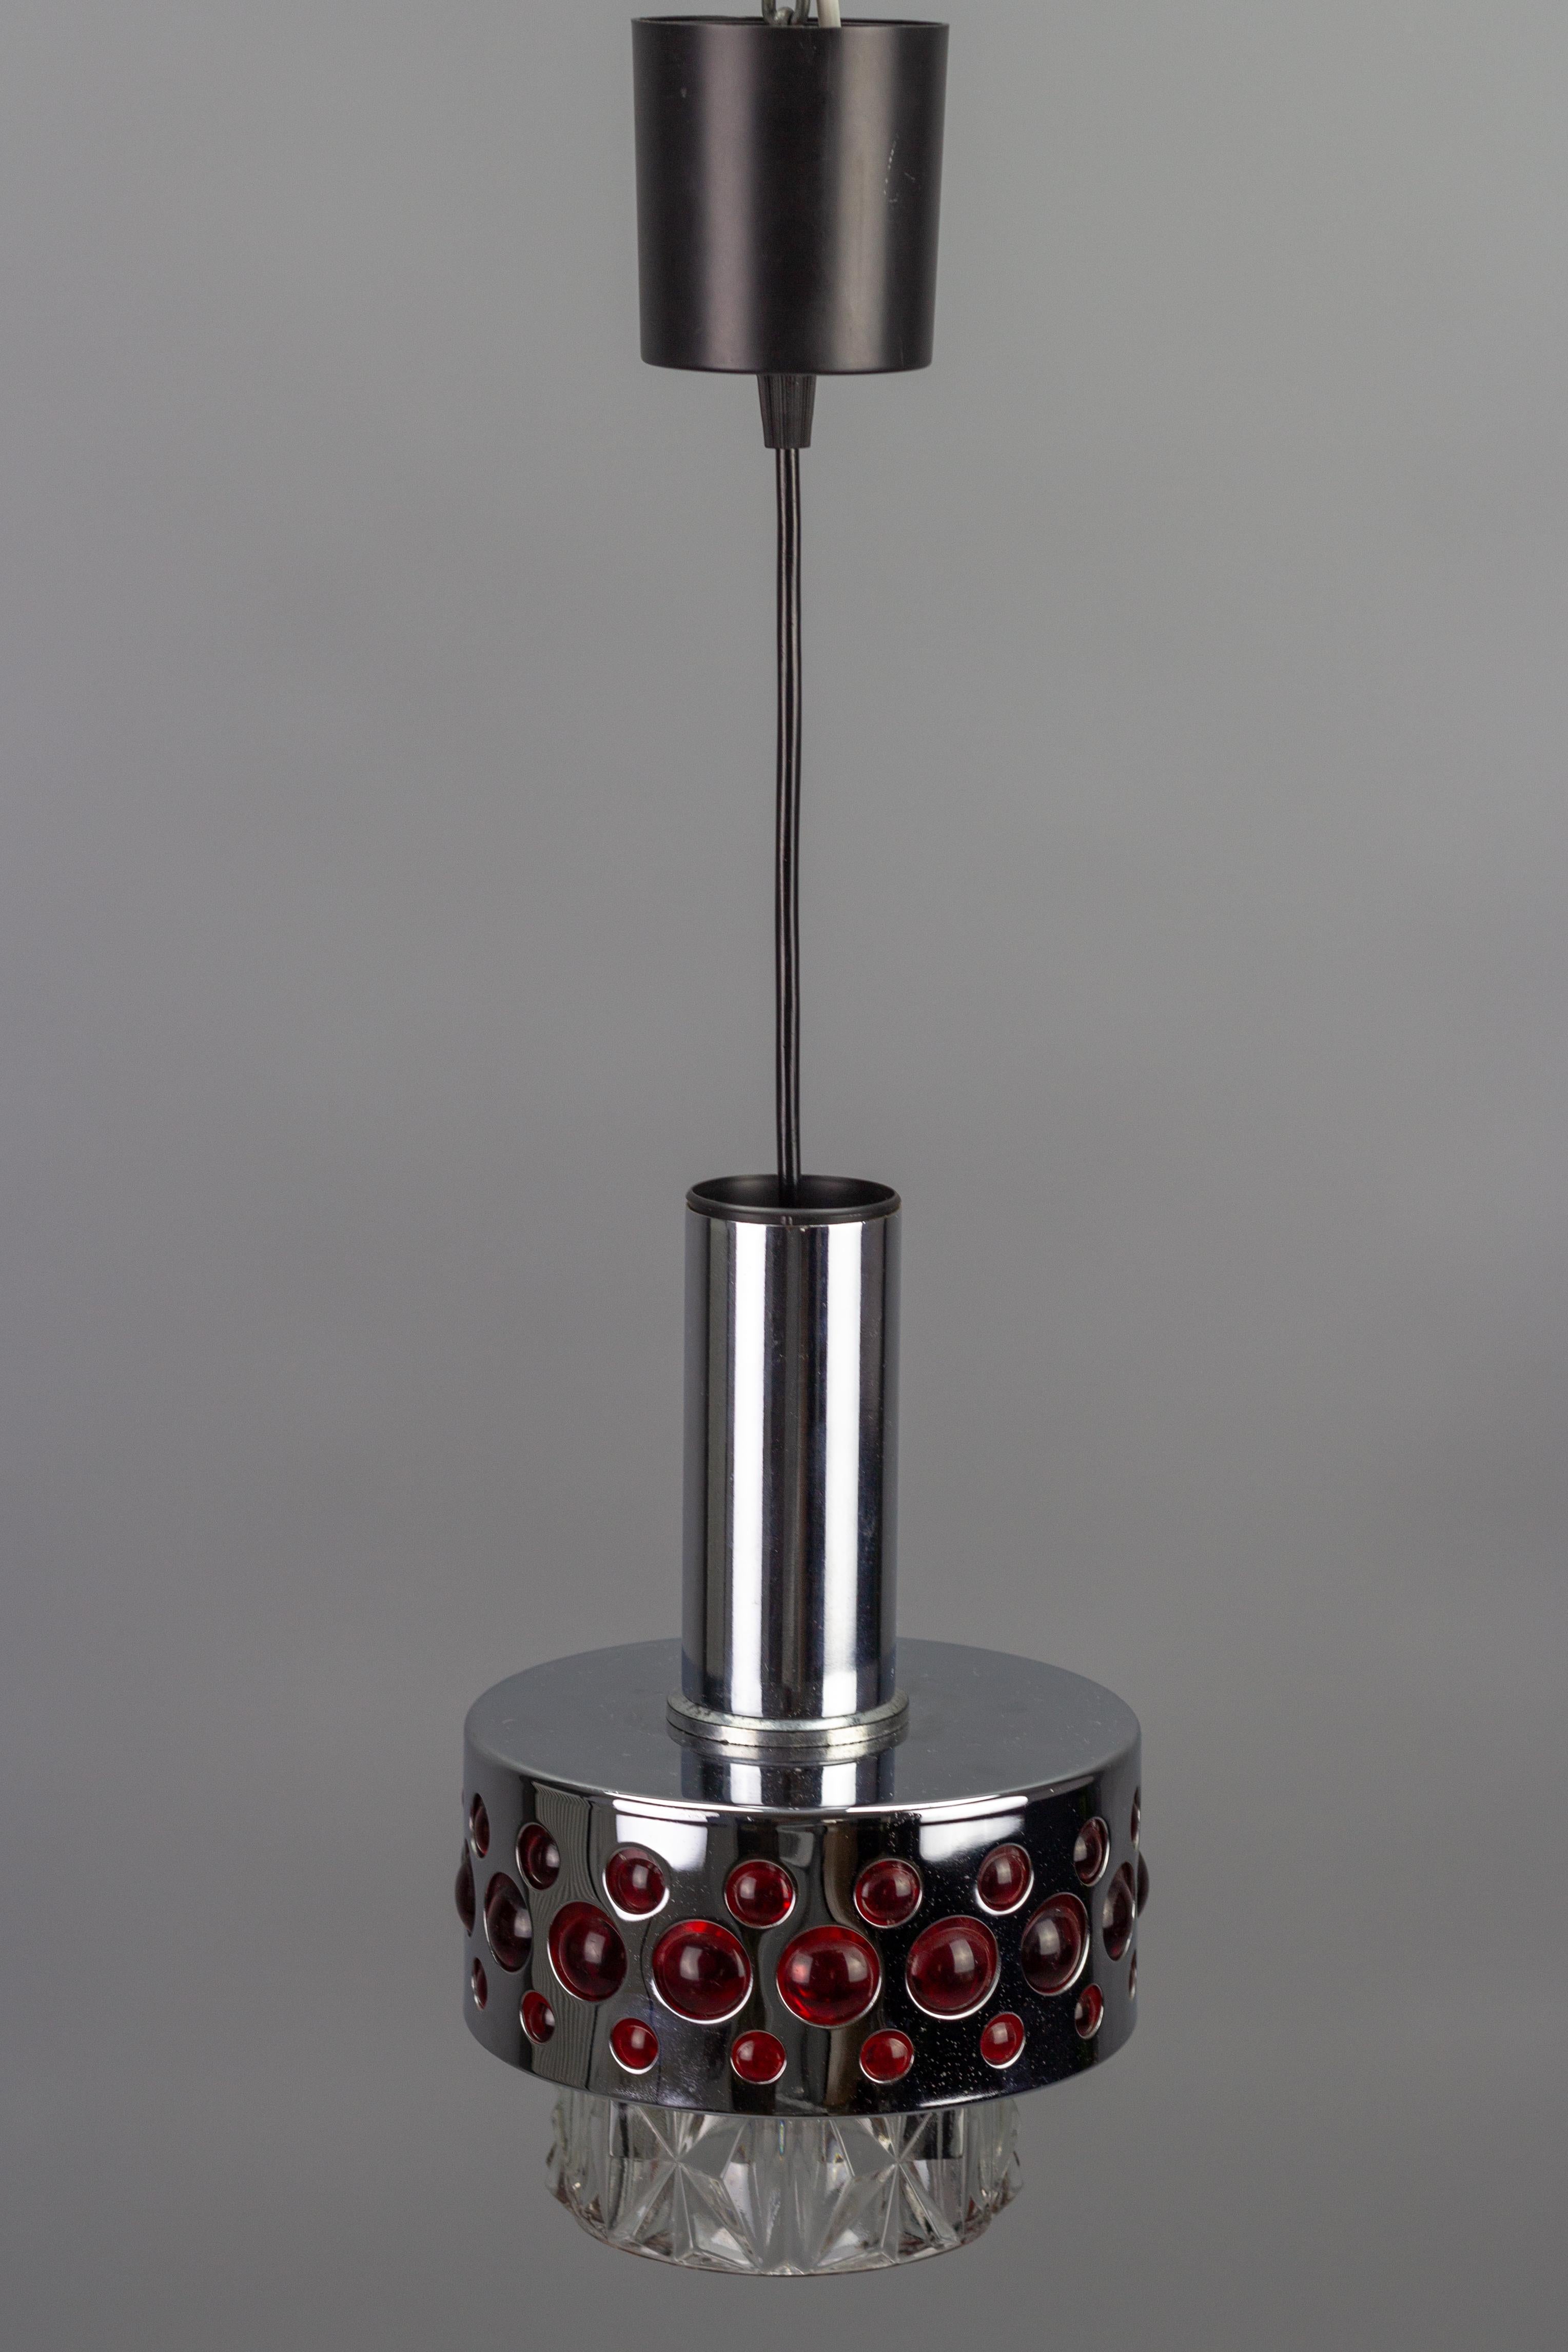 German Mid-Century Modern Chrome and Red Pendant Light by Richard Essig, 1970s For Sale 2